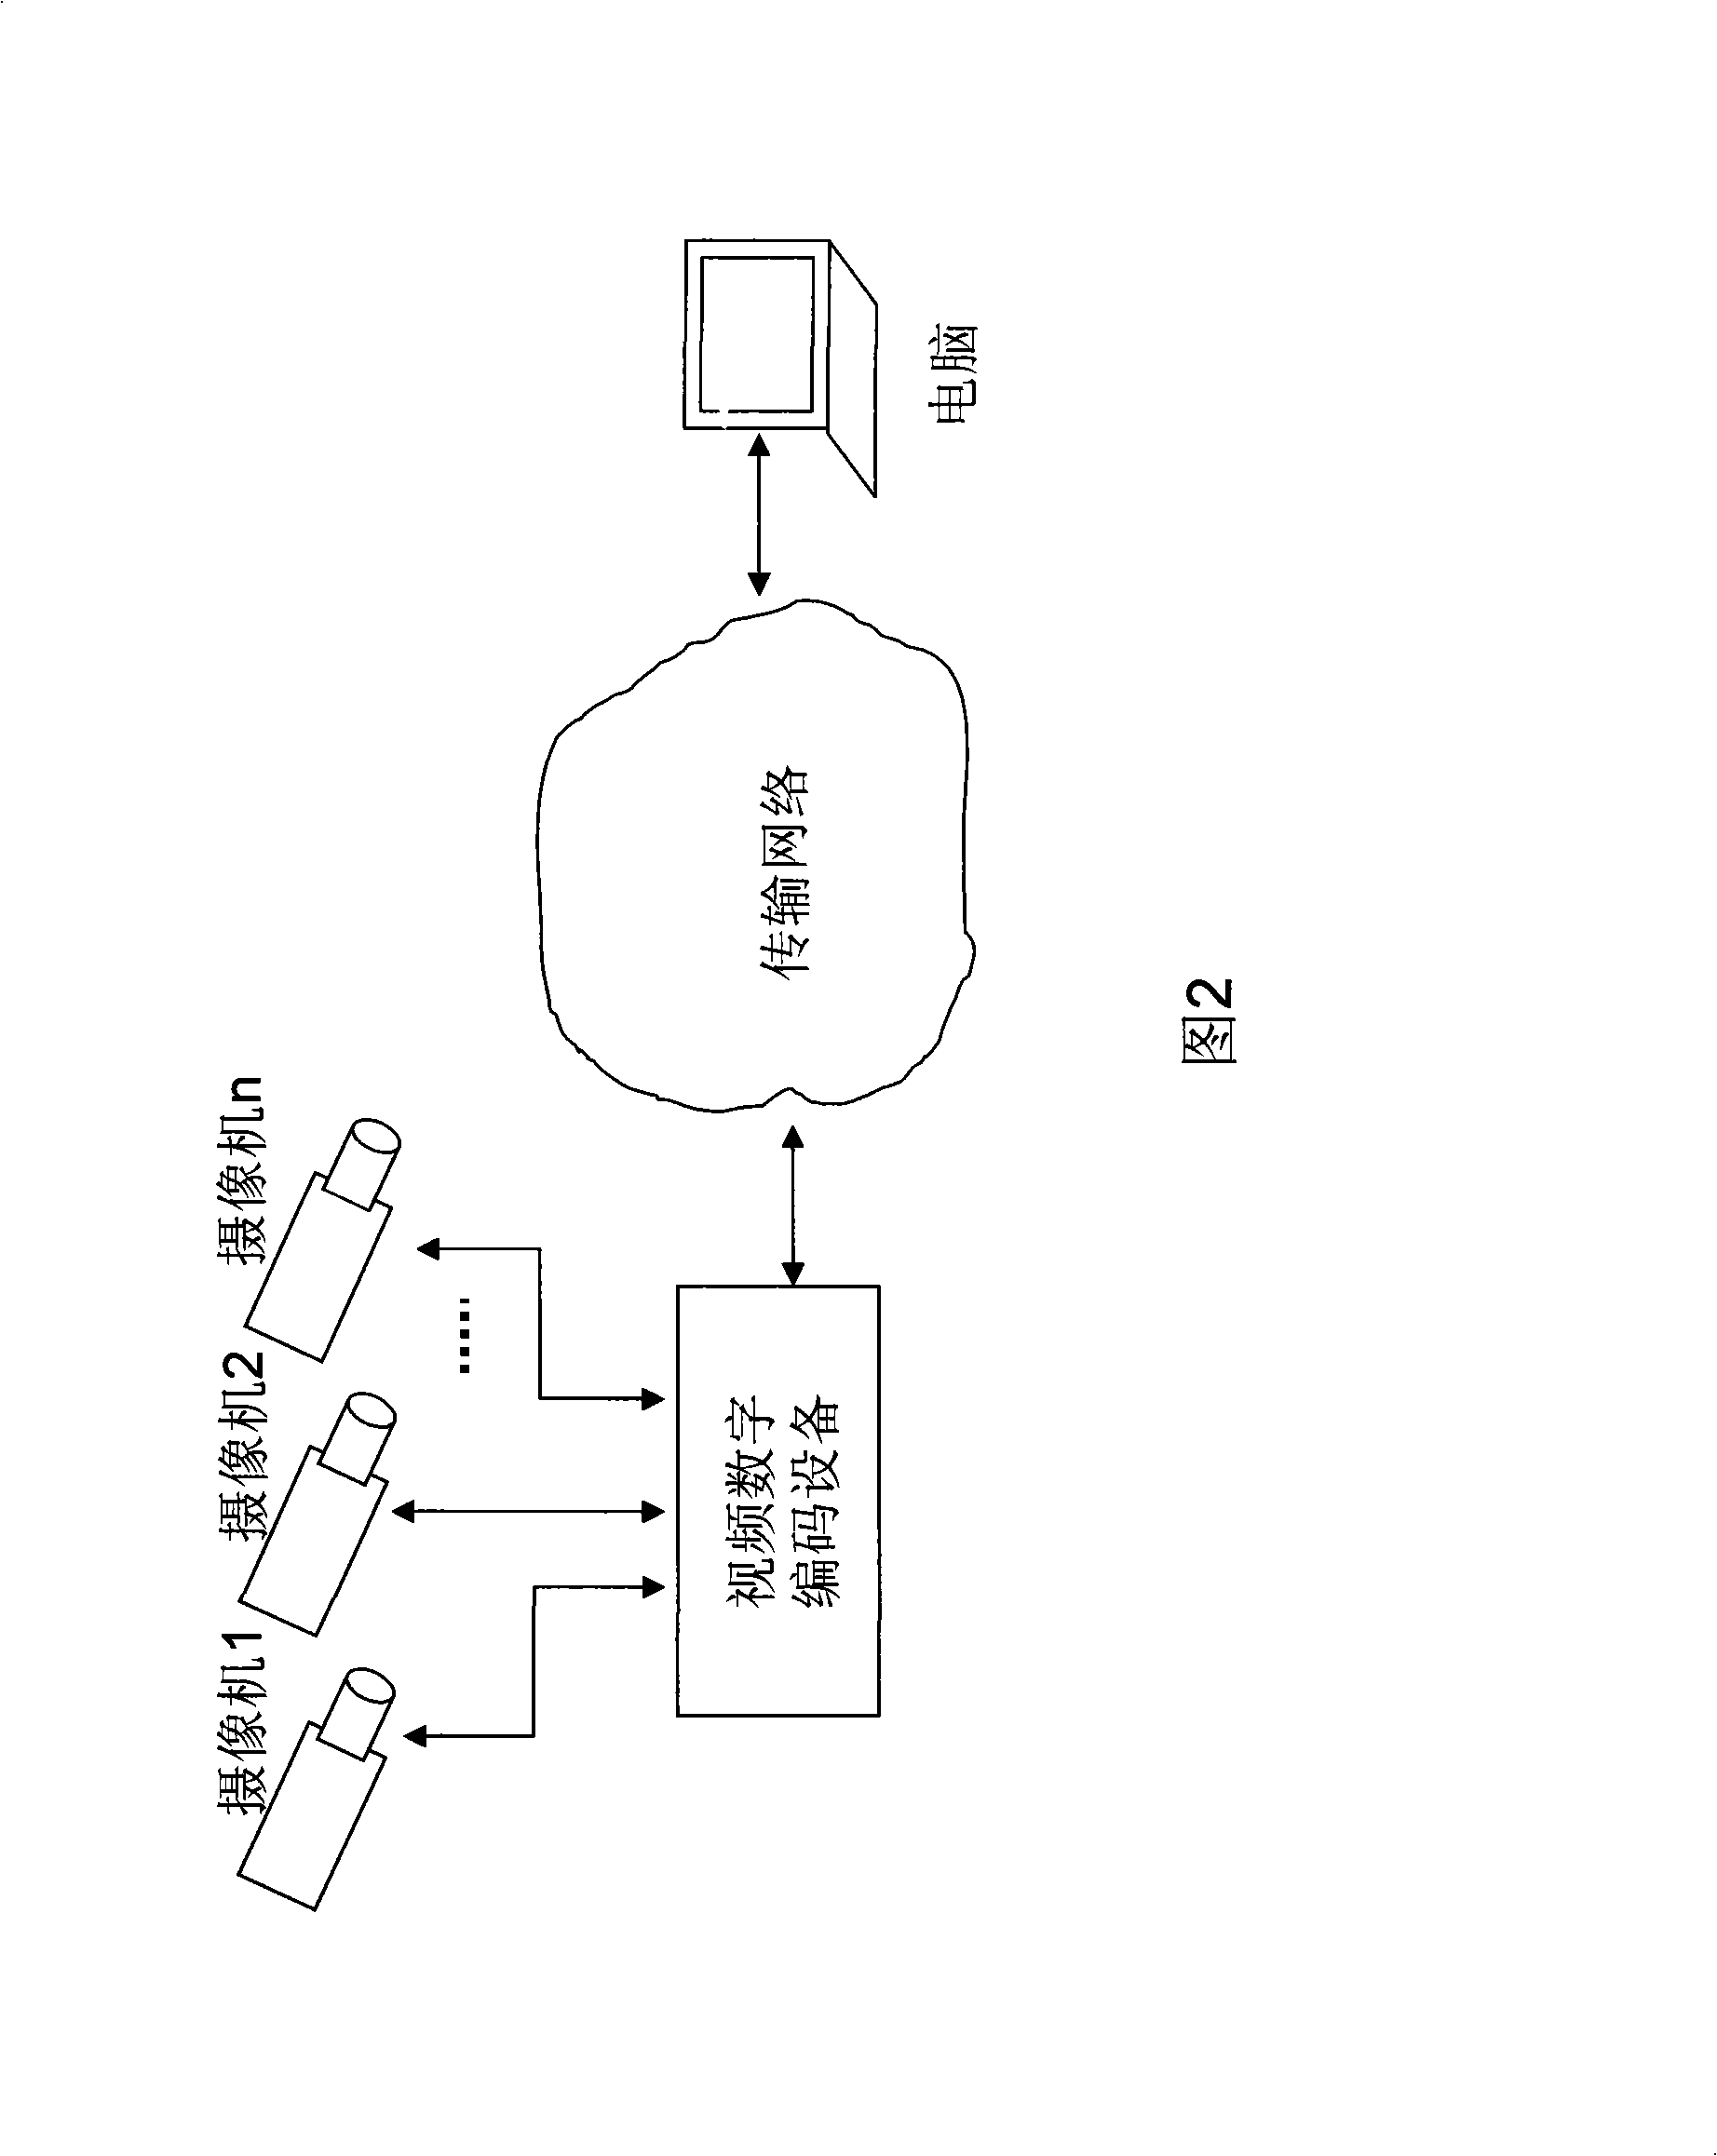 Panoramic video monitoring system and method with perspective automatically configured